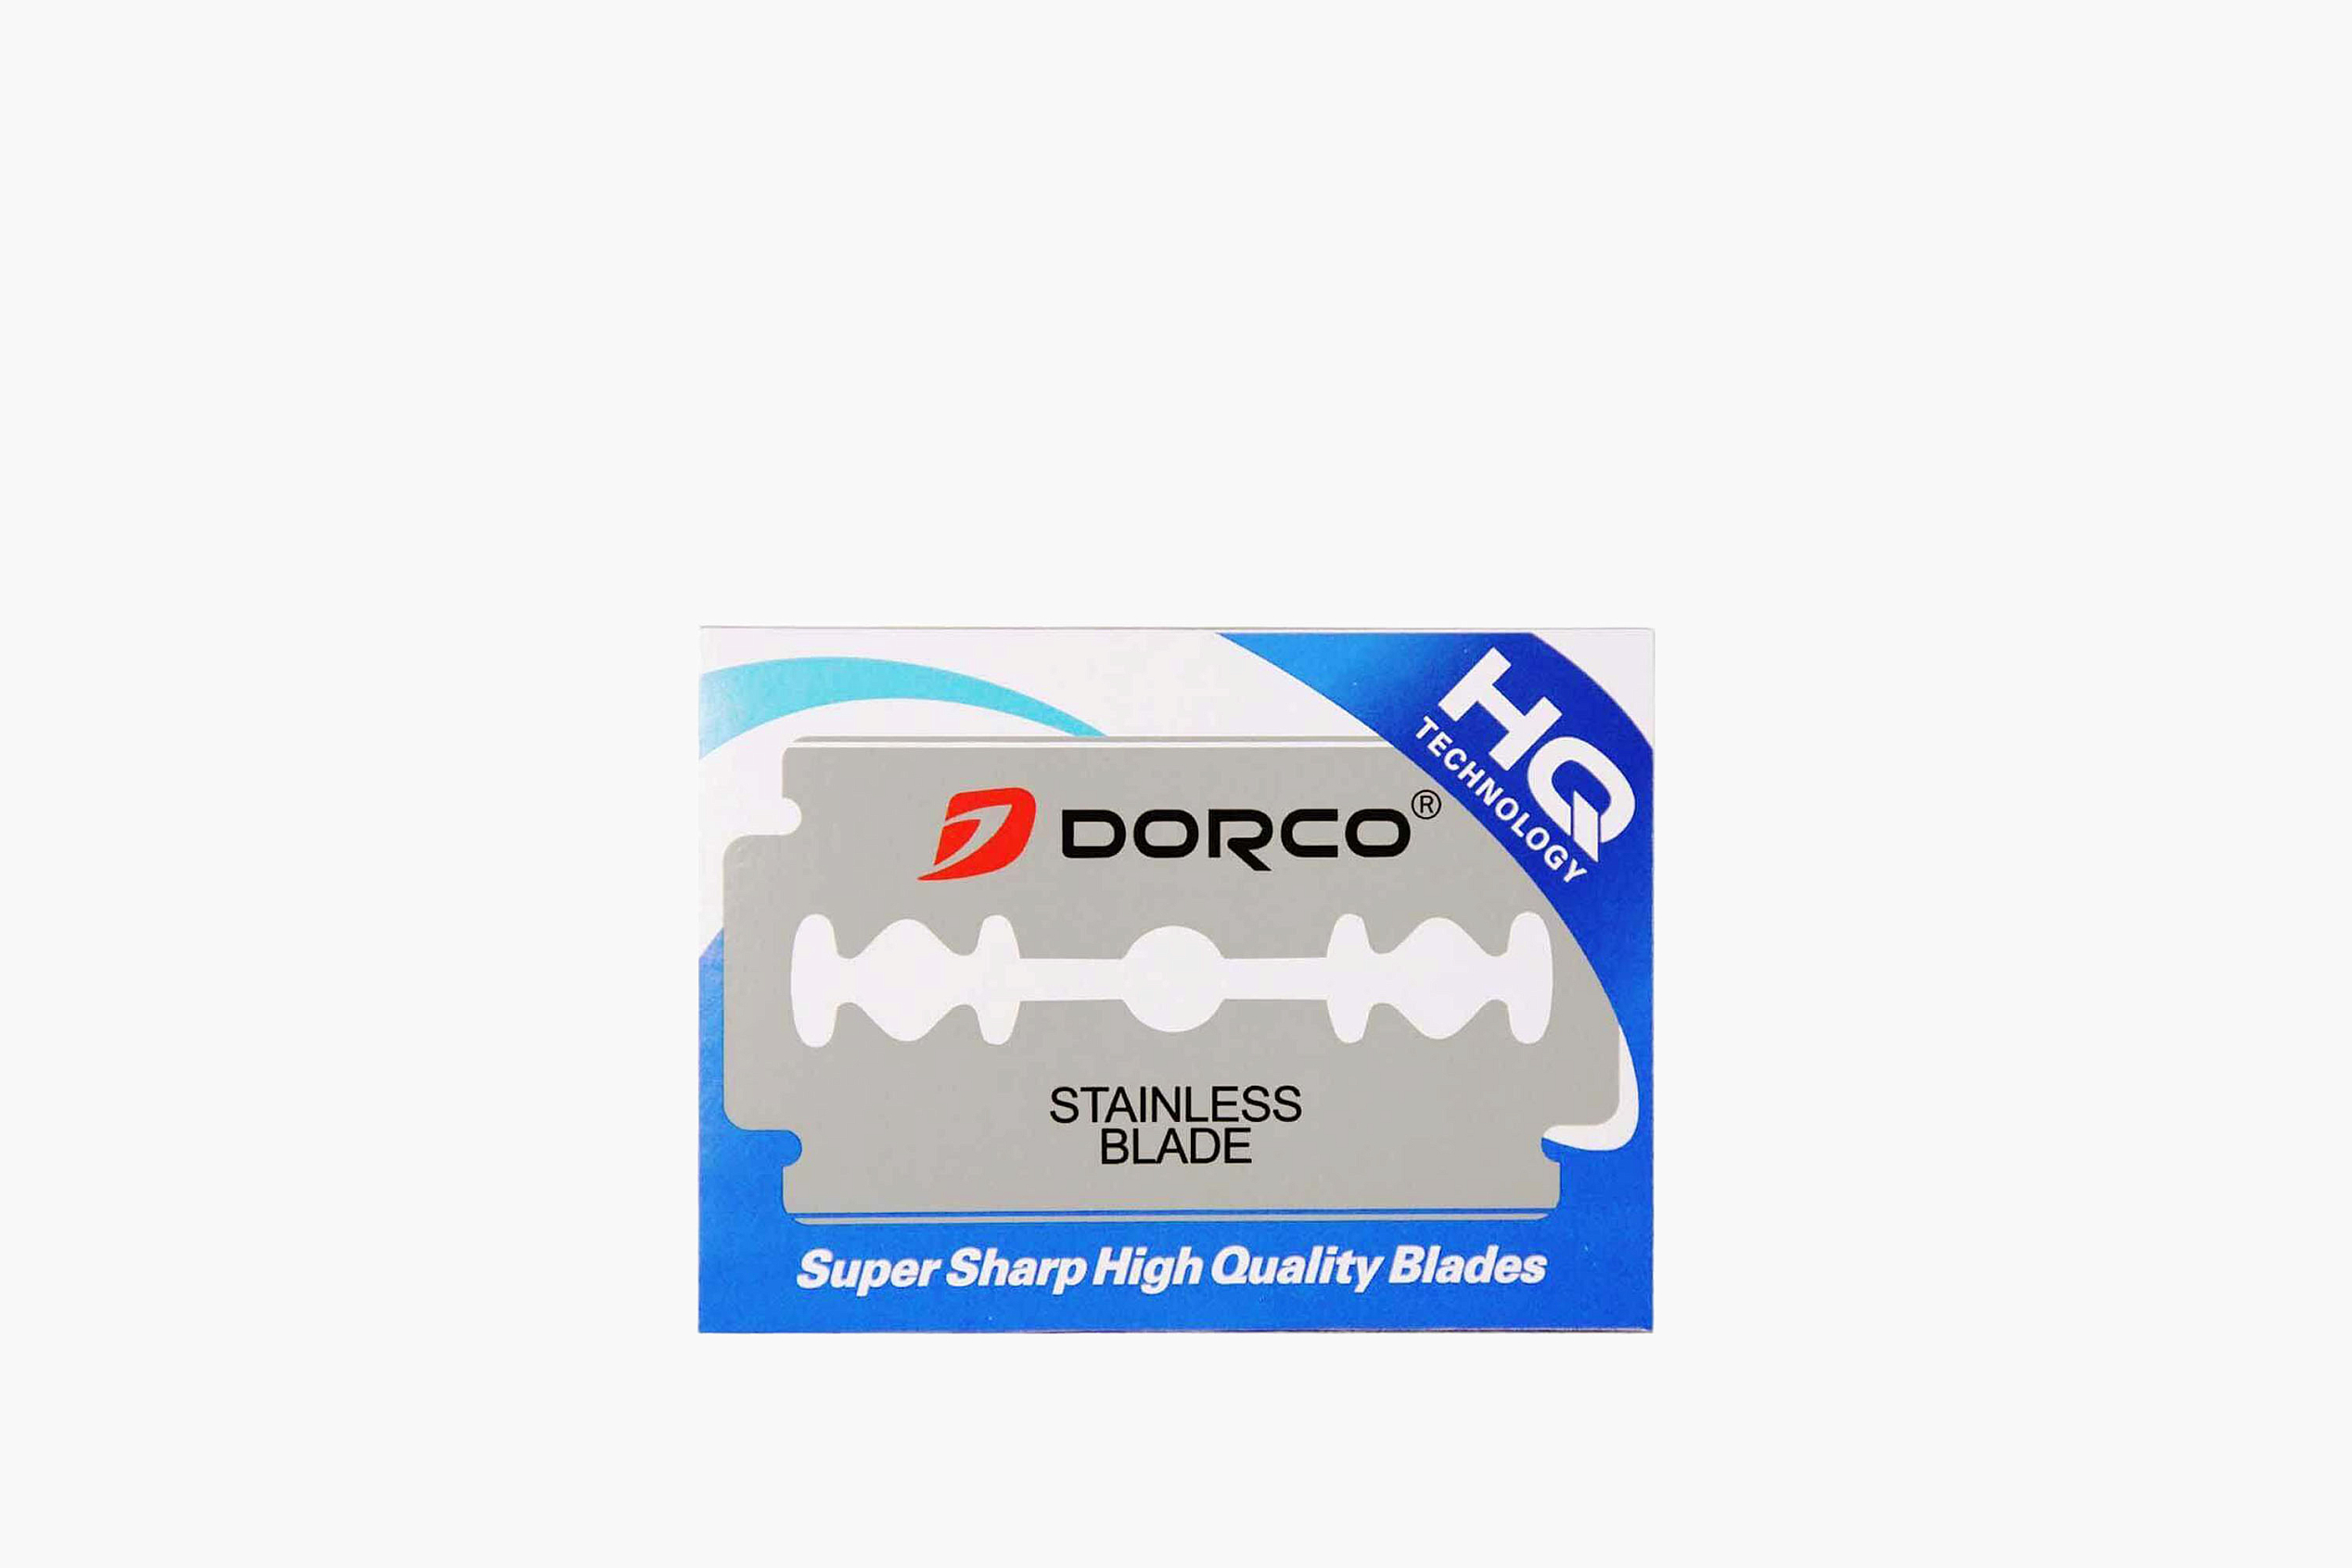 Dorco Blades are double-sided 20 dispensers фото 1